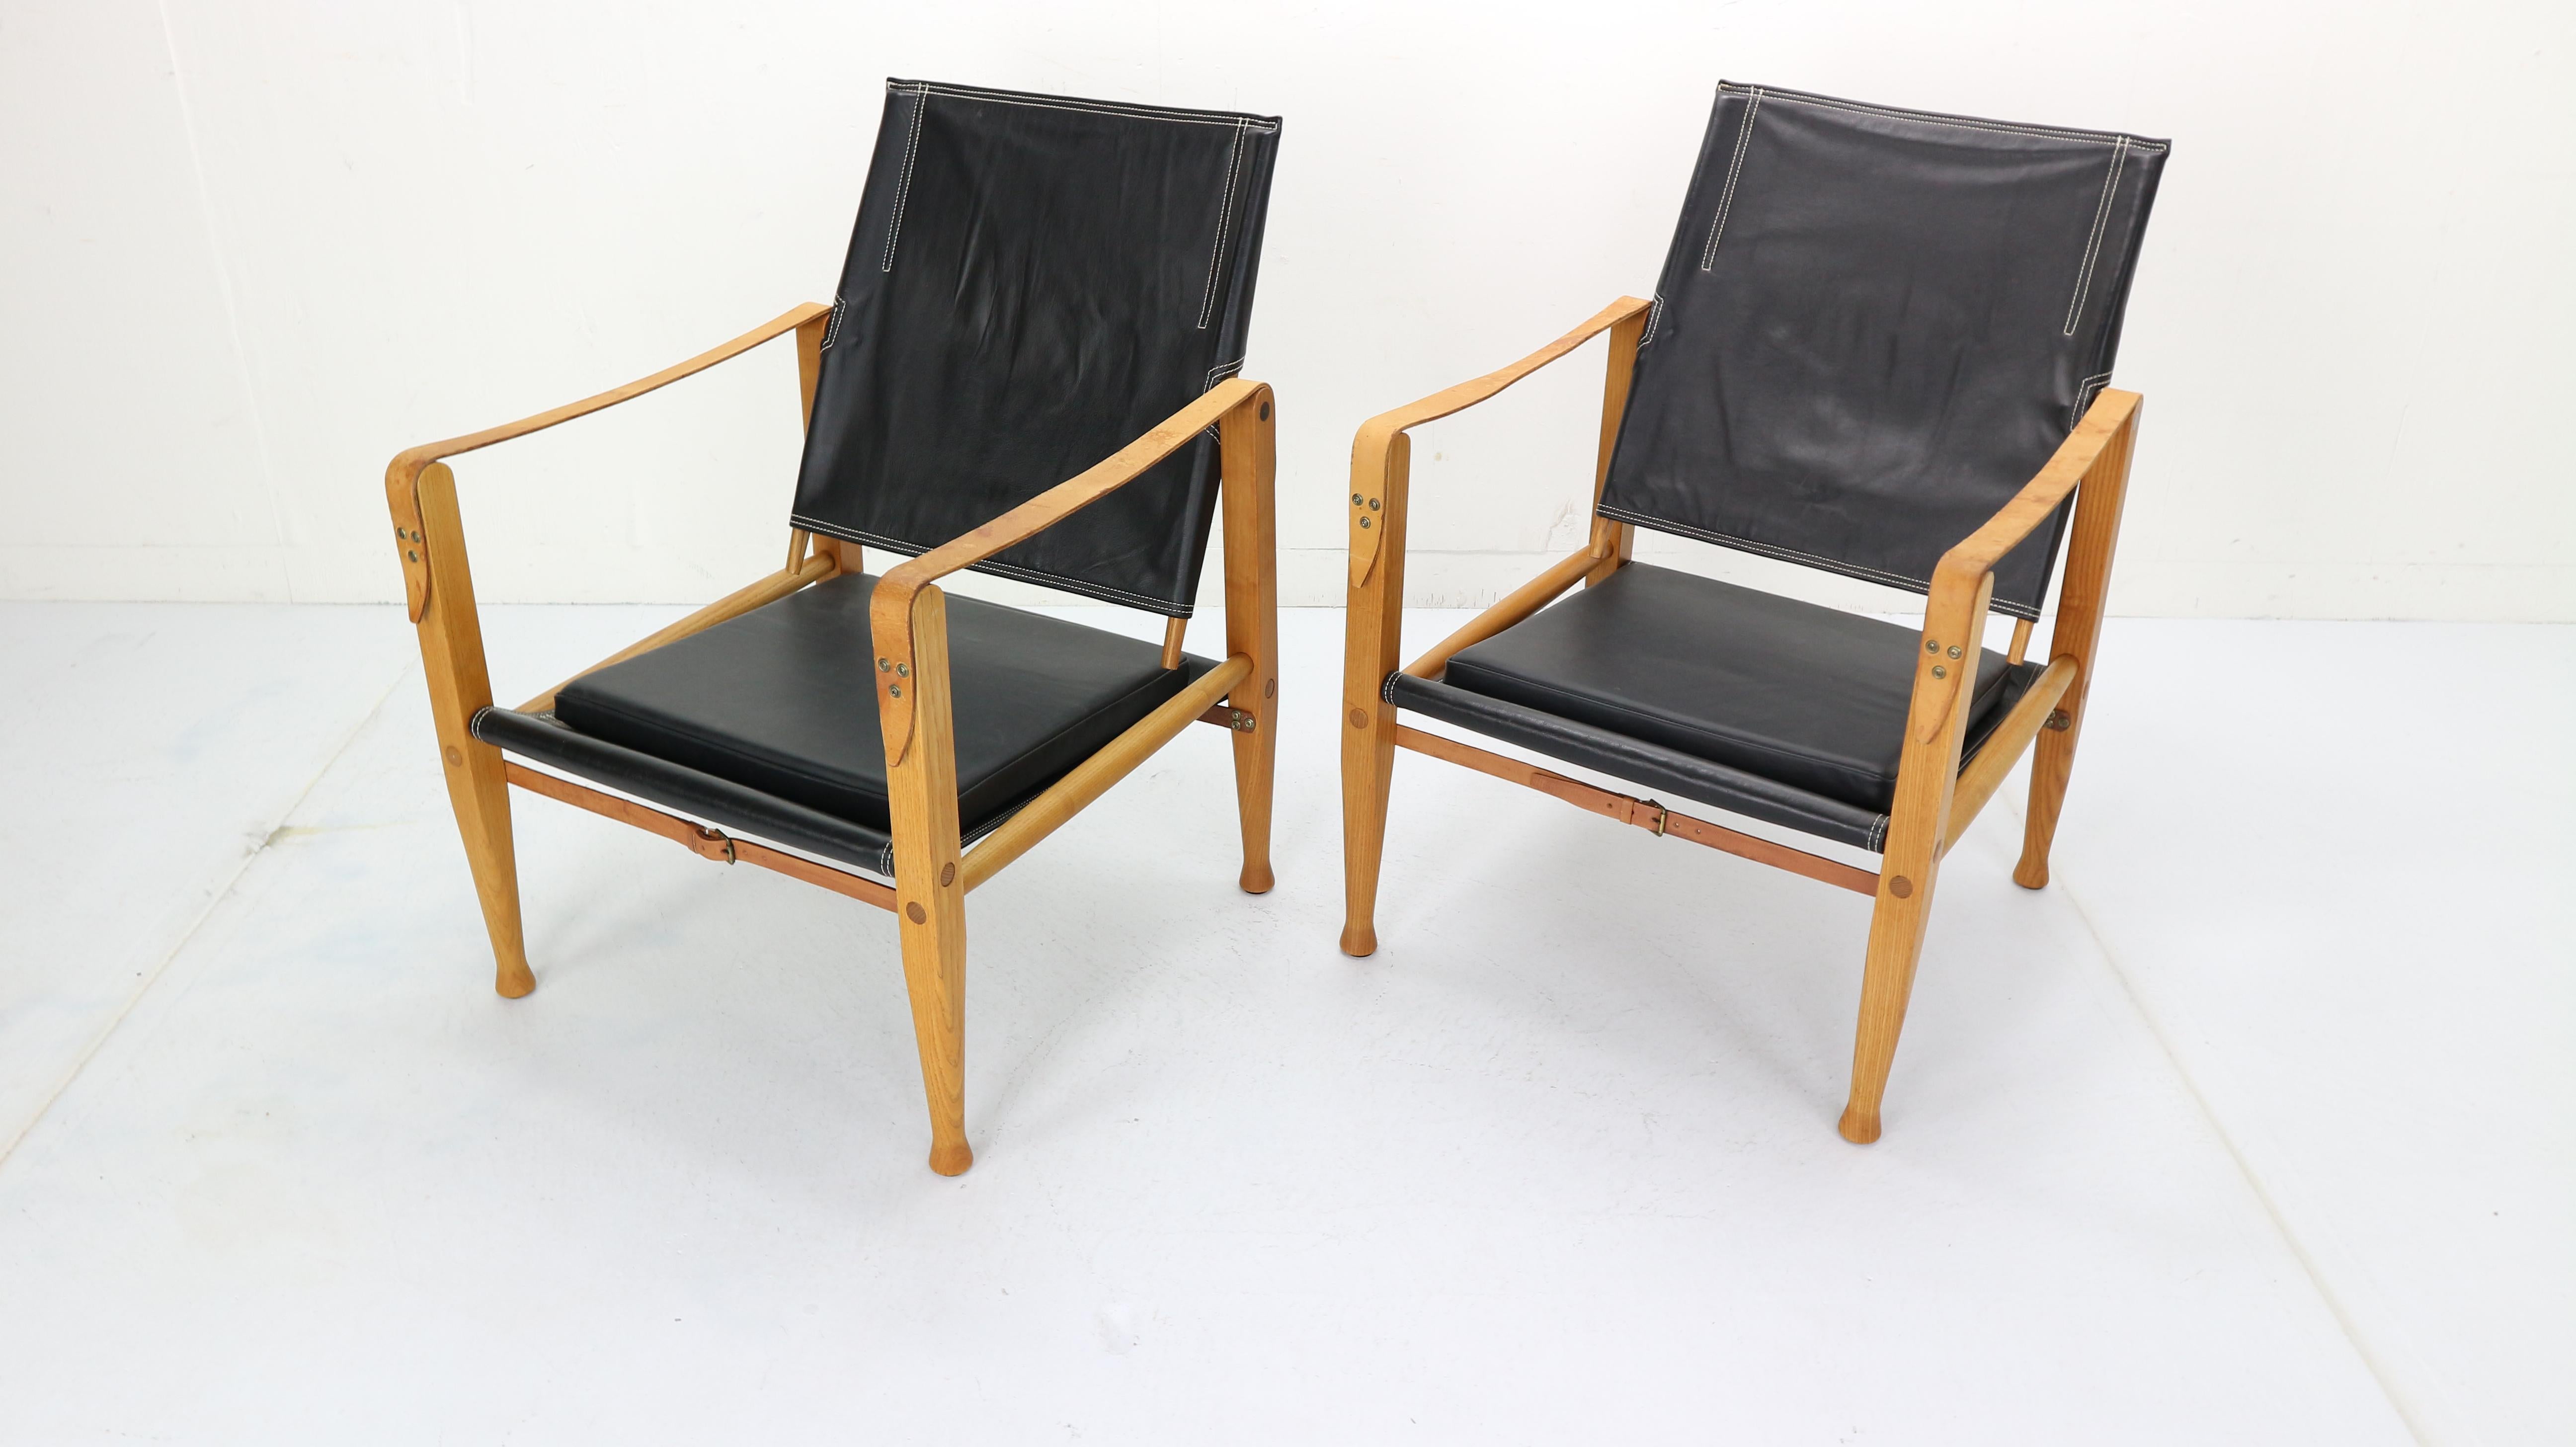 The original Danish safari chairs by Kaare Klint for Rud. Rasmussen.

First produced in 1933, this pair were made in the 1950s from strikingly grained ashwood.

With black leather seat, backrest and cushion, tan leather straps and brass